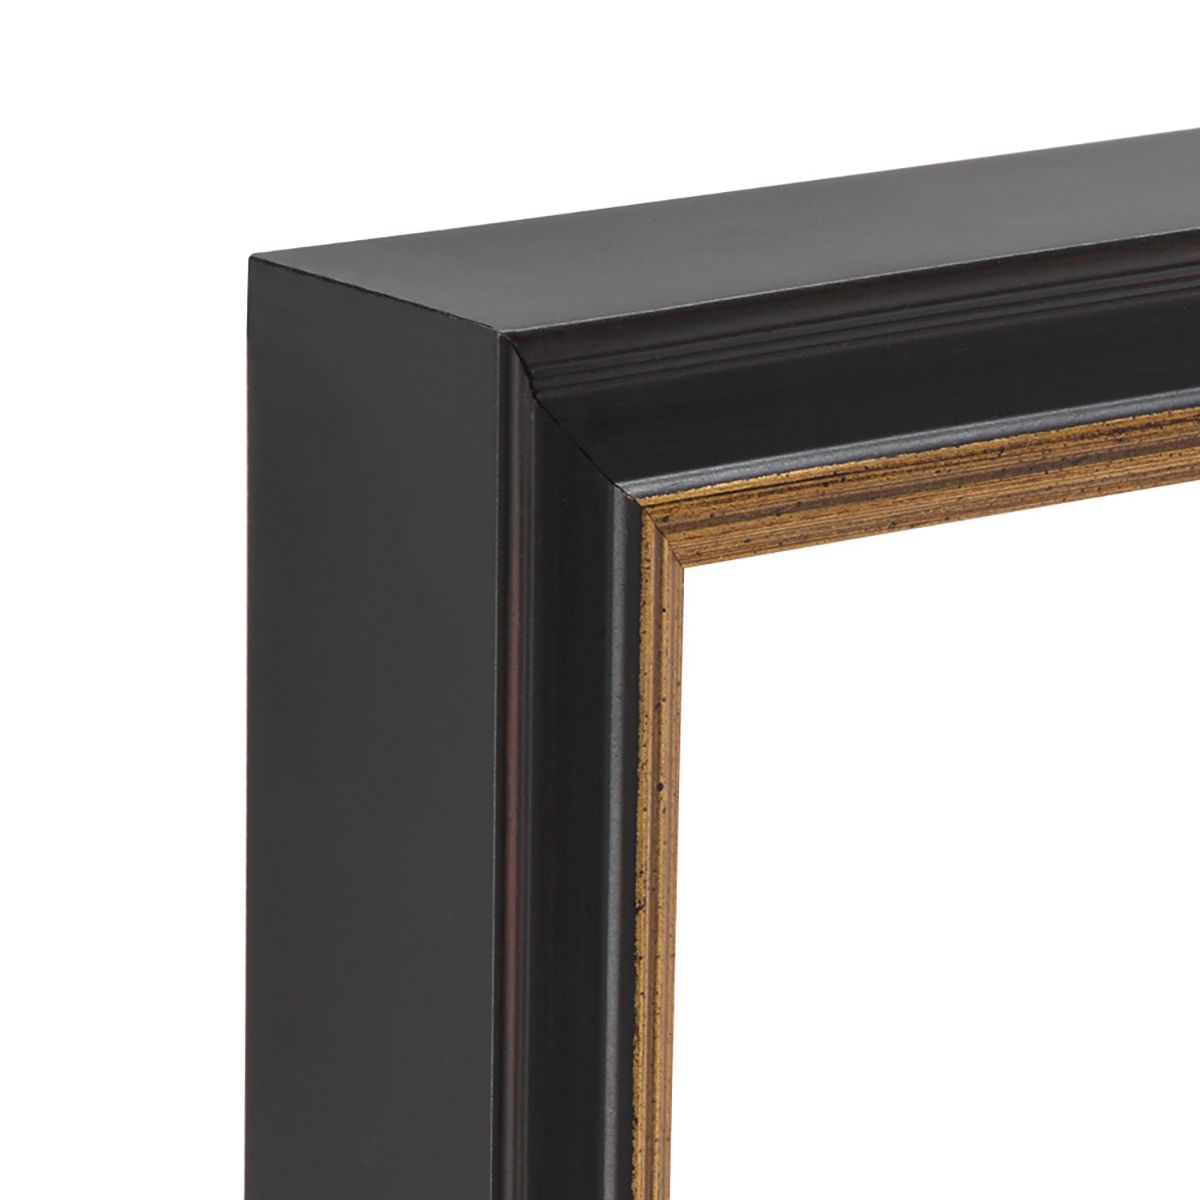 Millbrook Collection: Academy Black 3/4" Frame 16"x20" With Glass